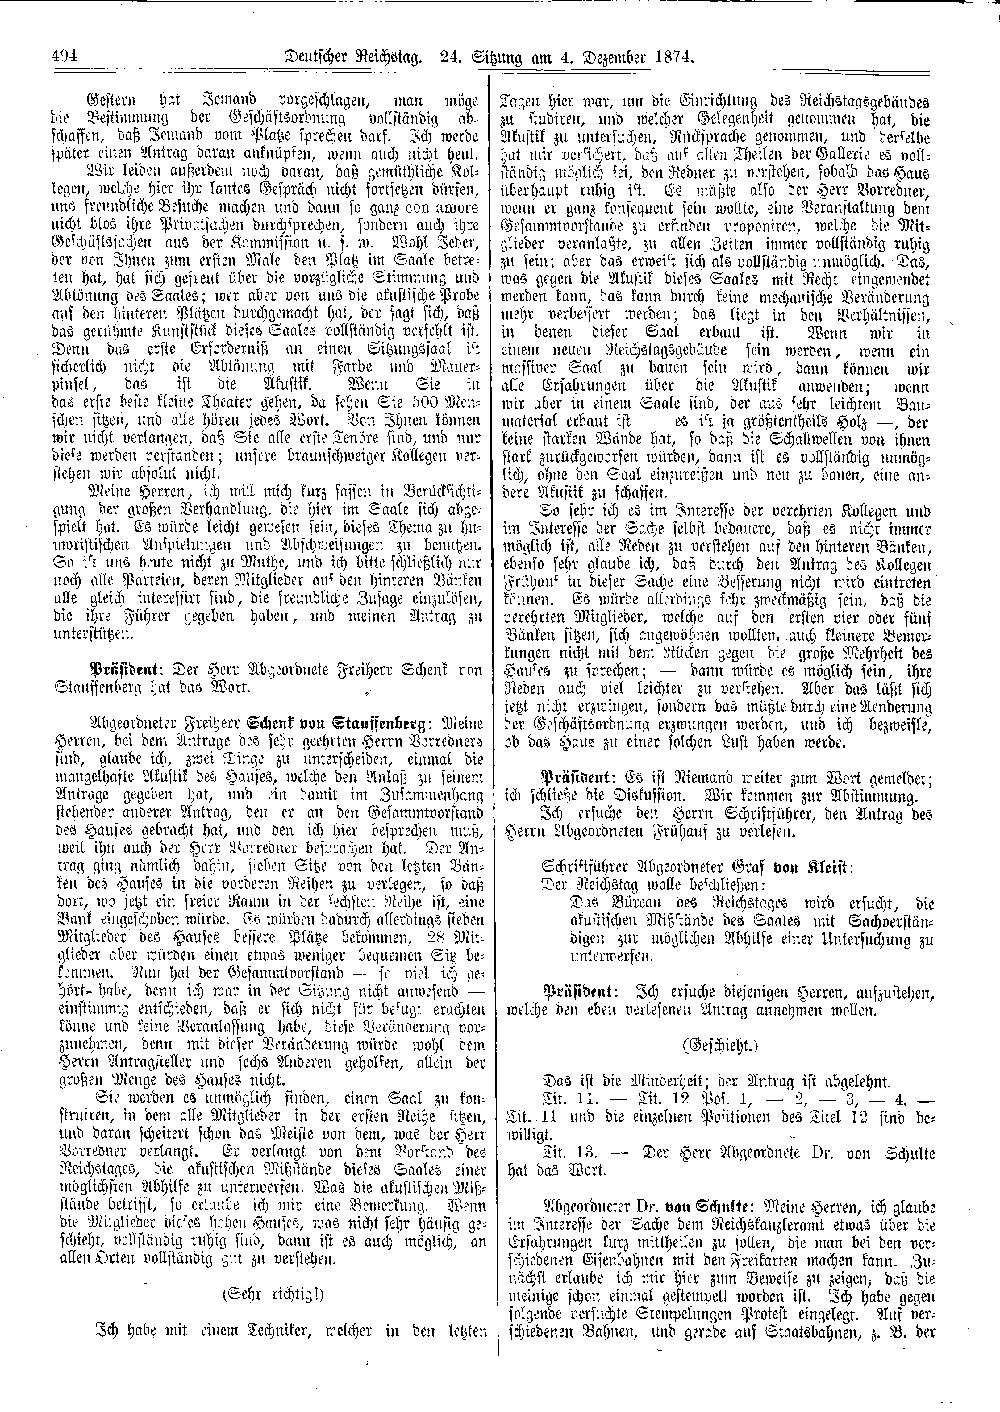 Scan of page 494